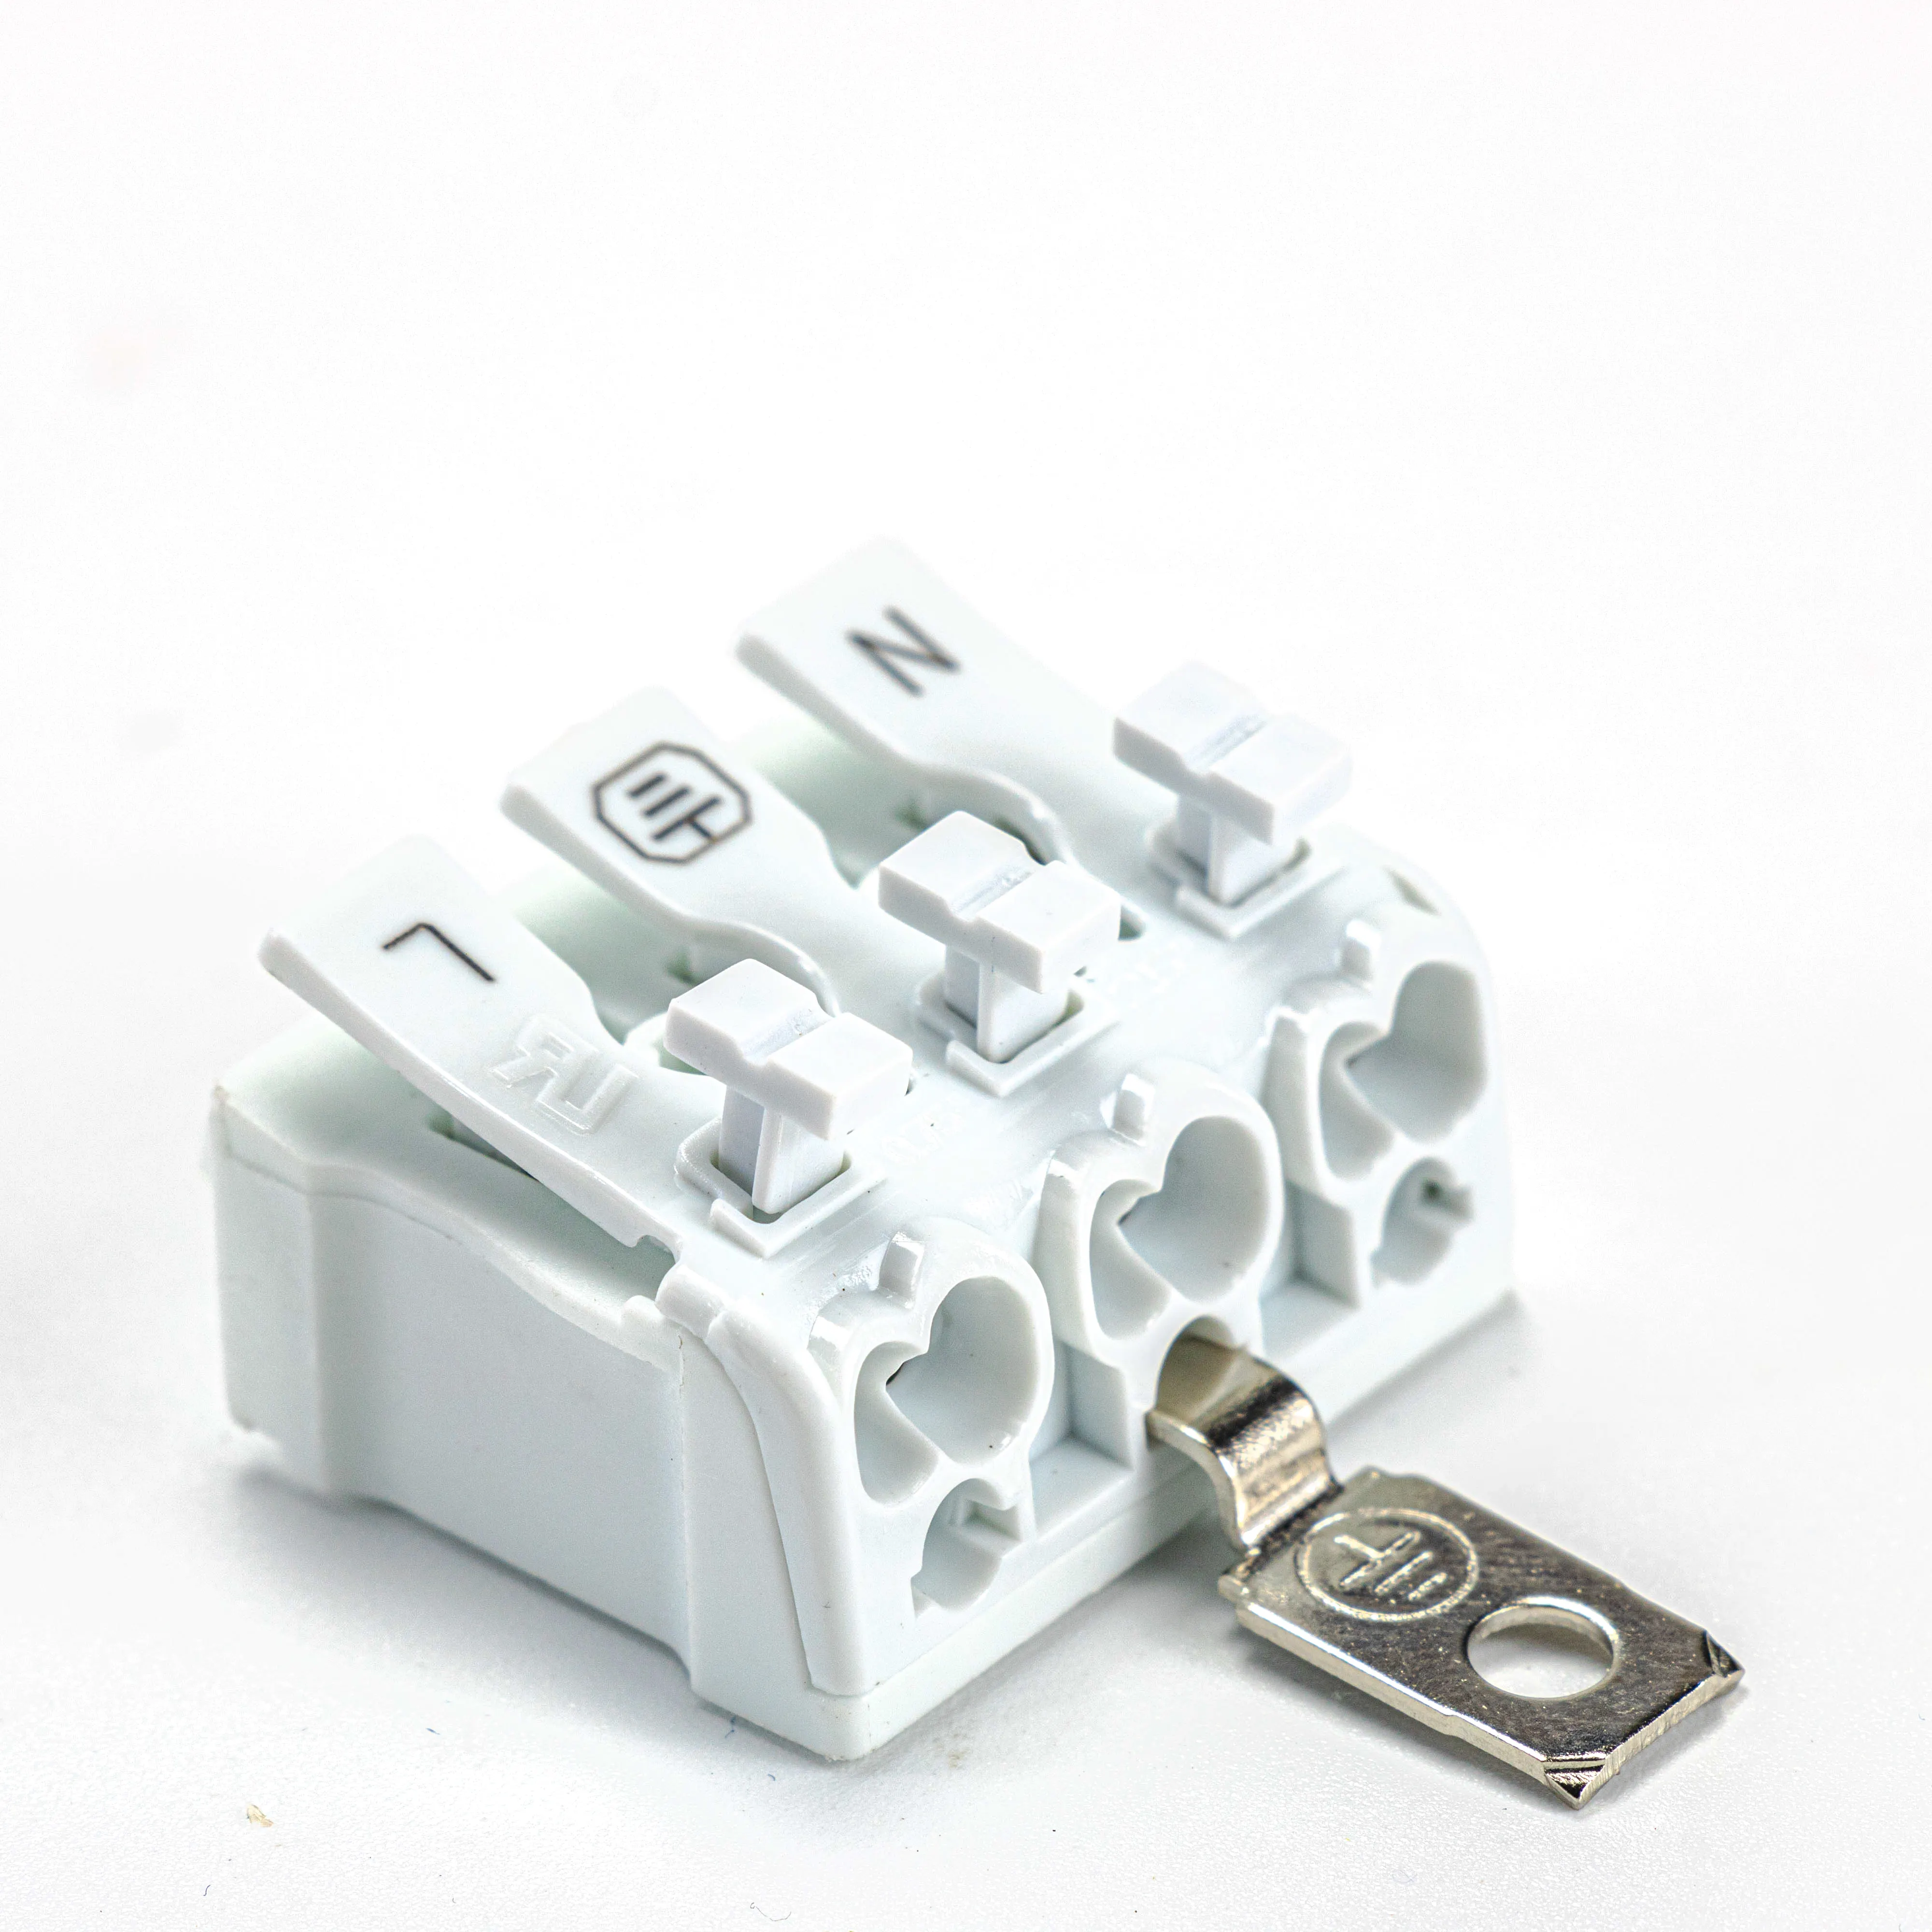 New arrival OJ-831 3Pins Quick Wire Terminal Block Spring Connector Led Strip Light Connectors p02 connector